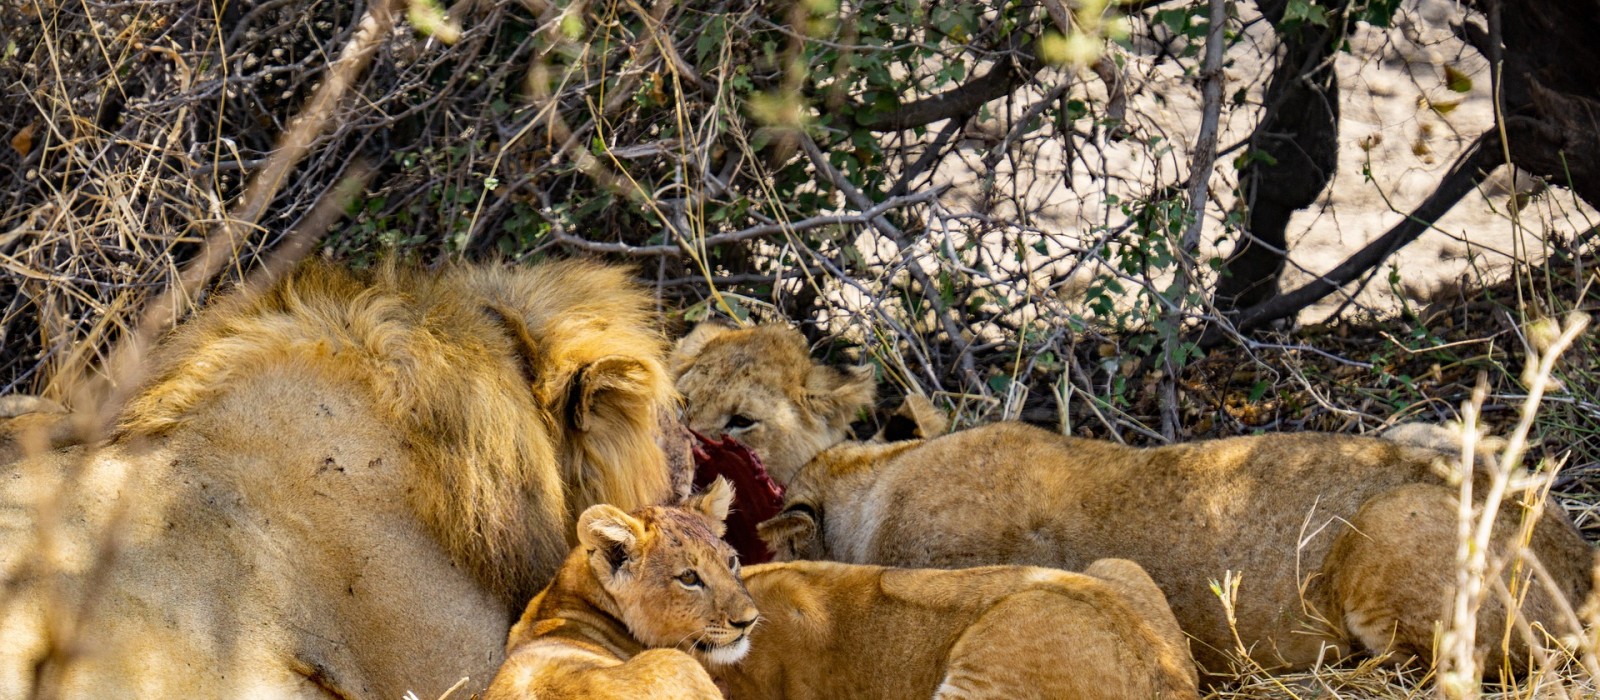 Find your ideal Tanzania safari from a wide range of options, including private and shared tours, luxury and budget options, and various park and highlight combinations